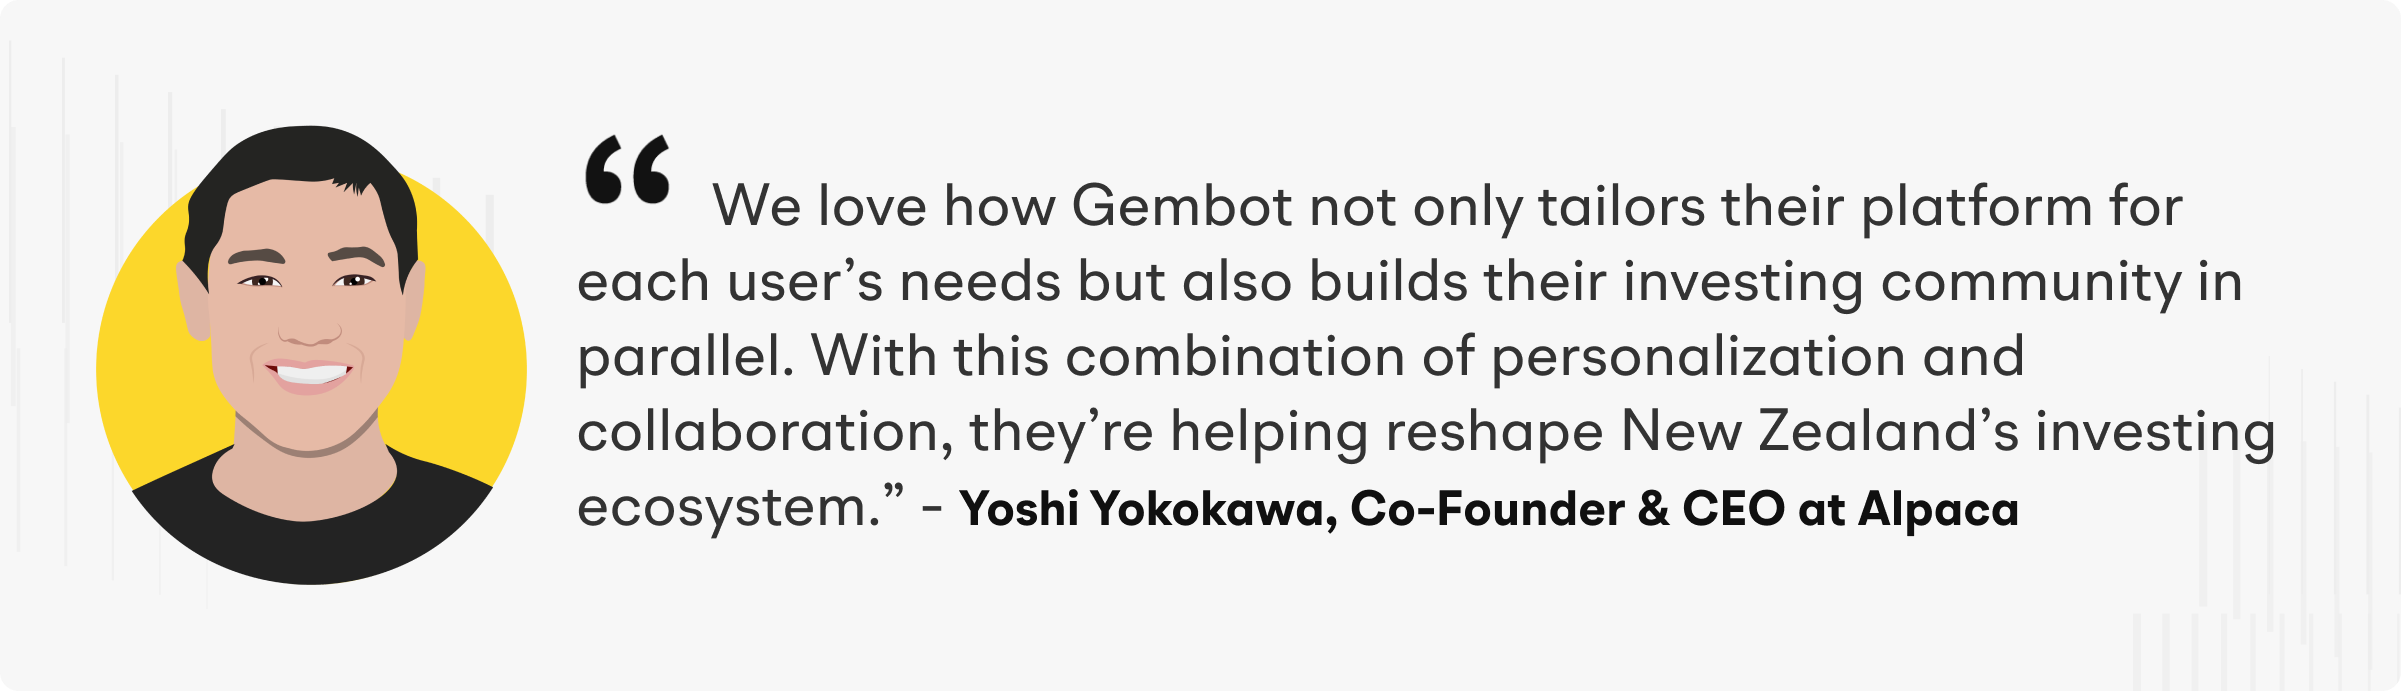 “We love how Gembot not only tailors their platform for each user’s needs but also builds their investing community in parallel. With this combination of personalization and collaboration, they’re helping reshape New Zealand’s investing ecosystem.”